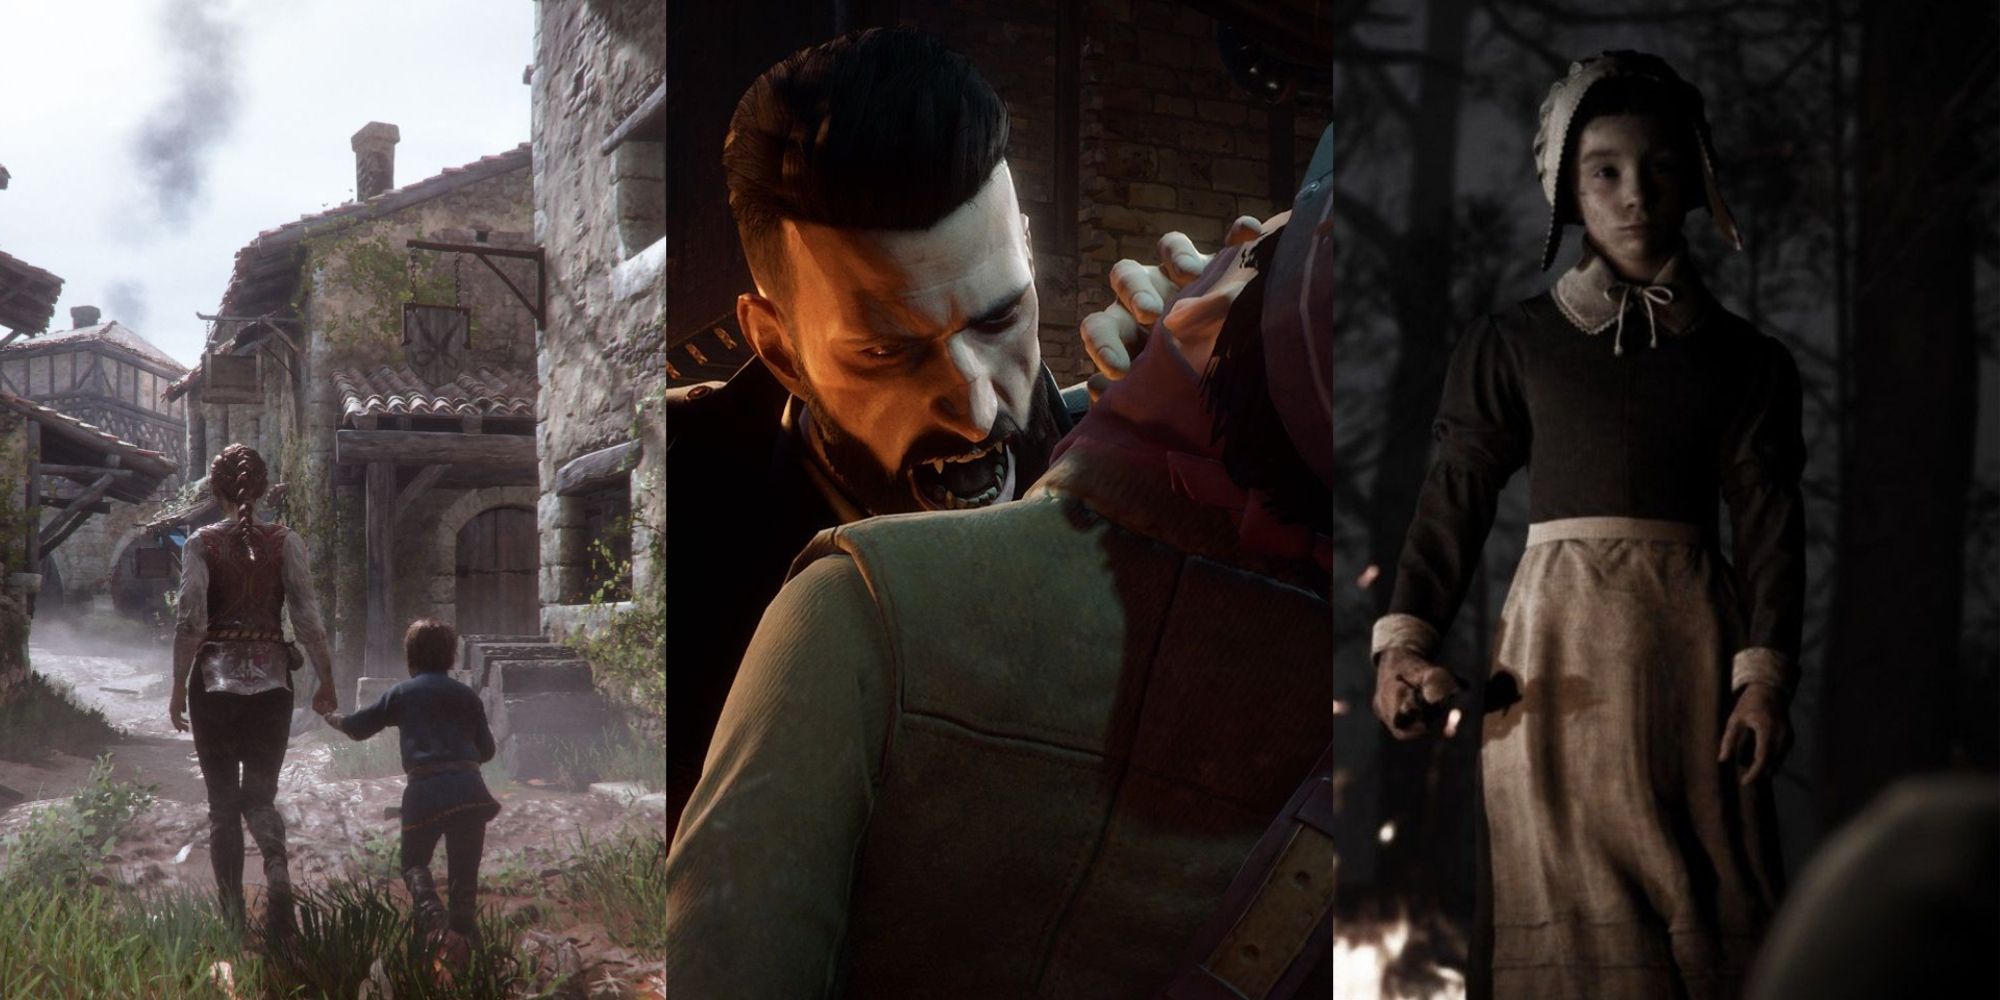 A three photo collage of Hugo and Amicia de Rune walking through a village in A Plague Tale: Innocence, Jonathan Harker biting the neck of an enemy in Vampyr, and Mary in period clothing by a fire in Little Hope.